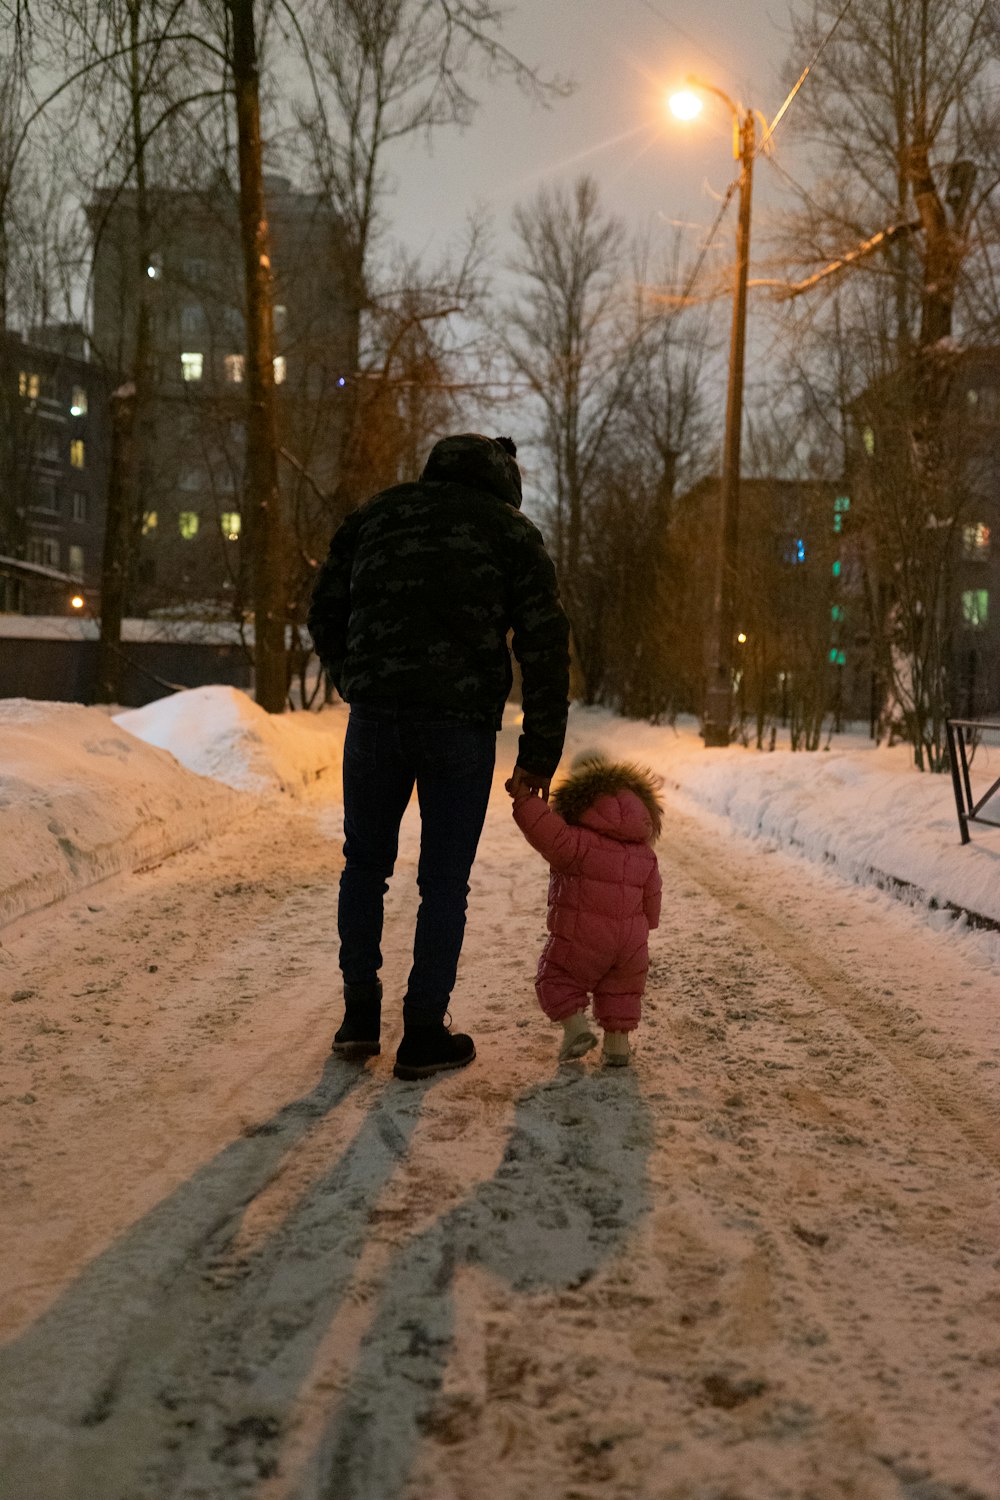 a man walking down a snow covered street holding a small child's hand